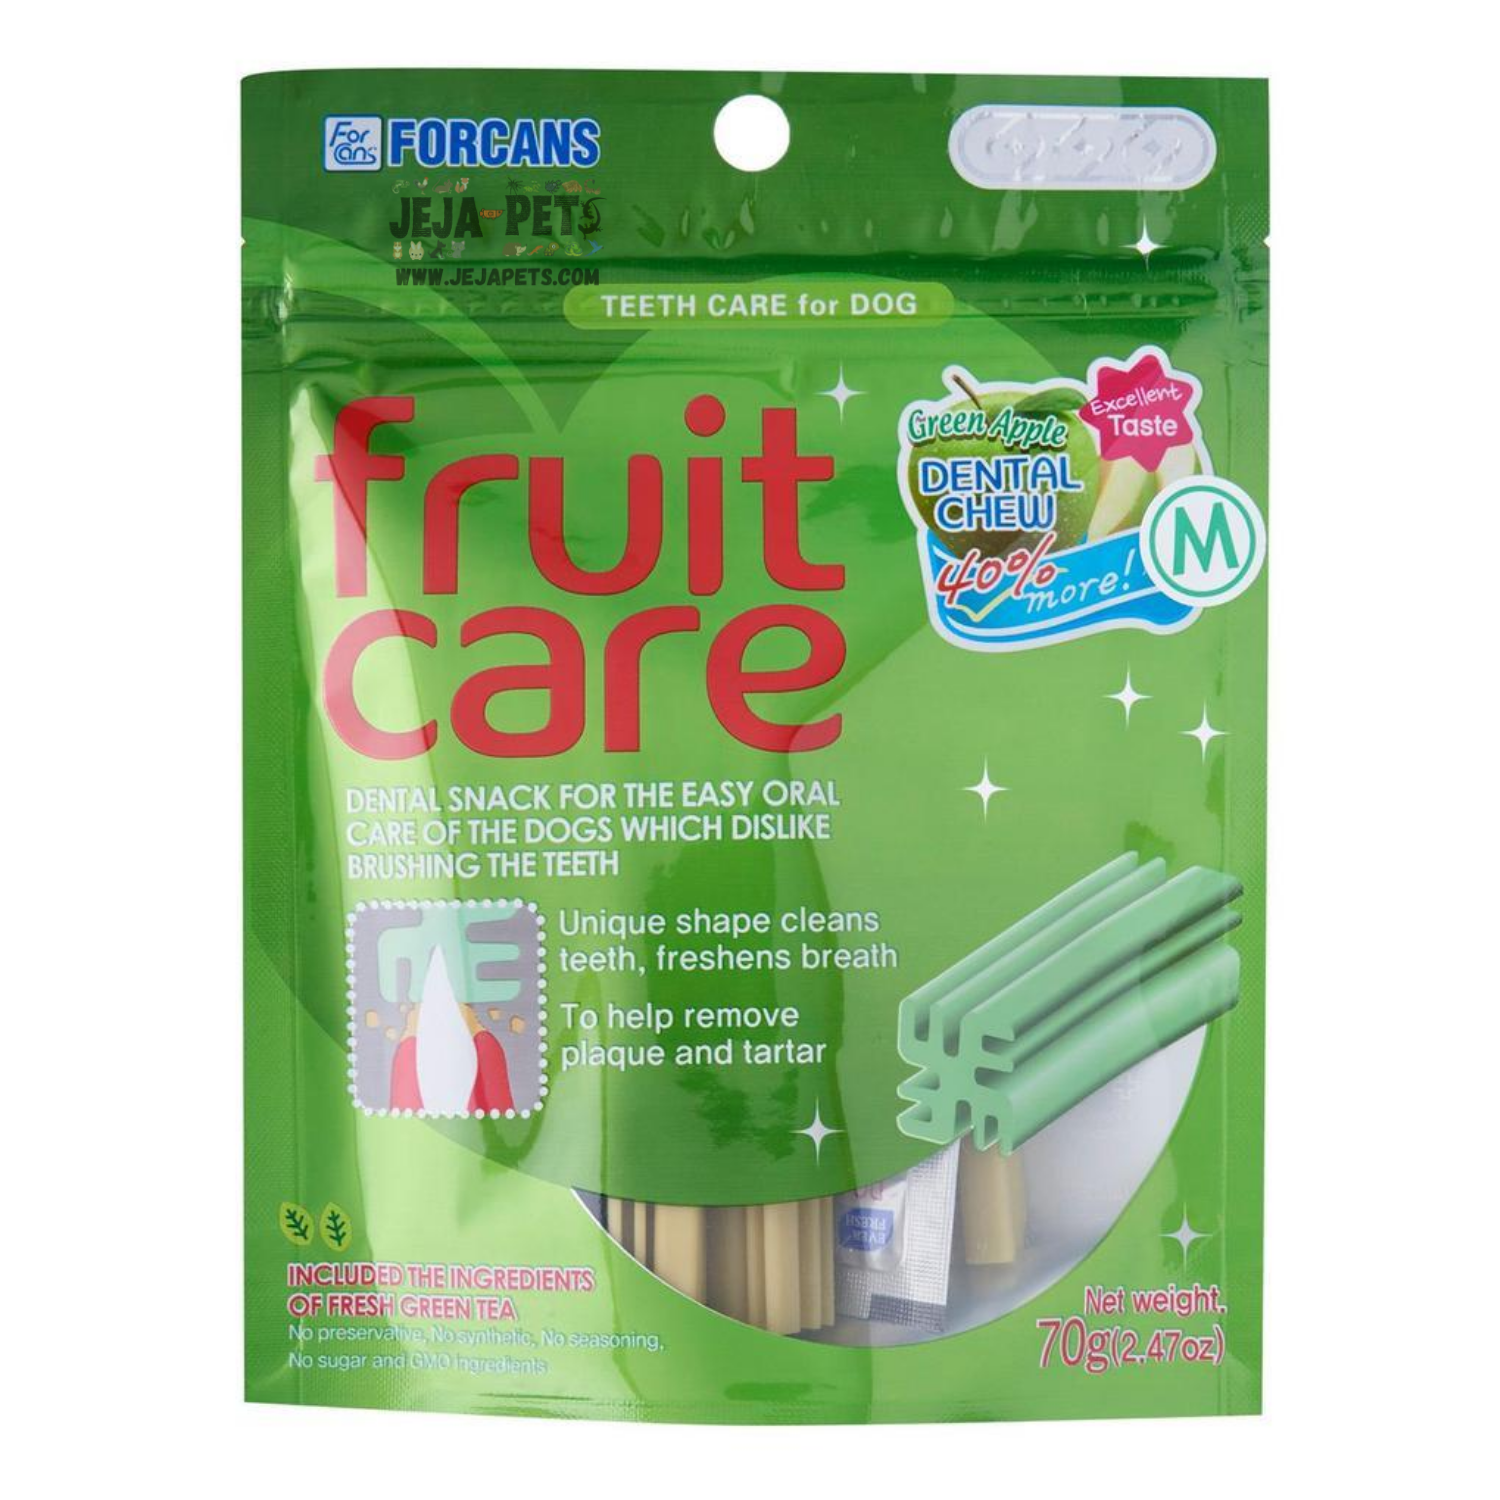 [DISCONTINUED] Forcans Fruit Care Green Apple - S / M (70g)